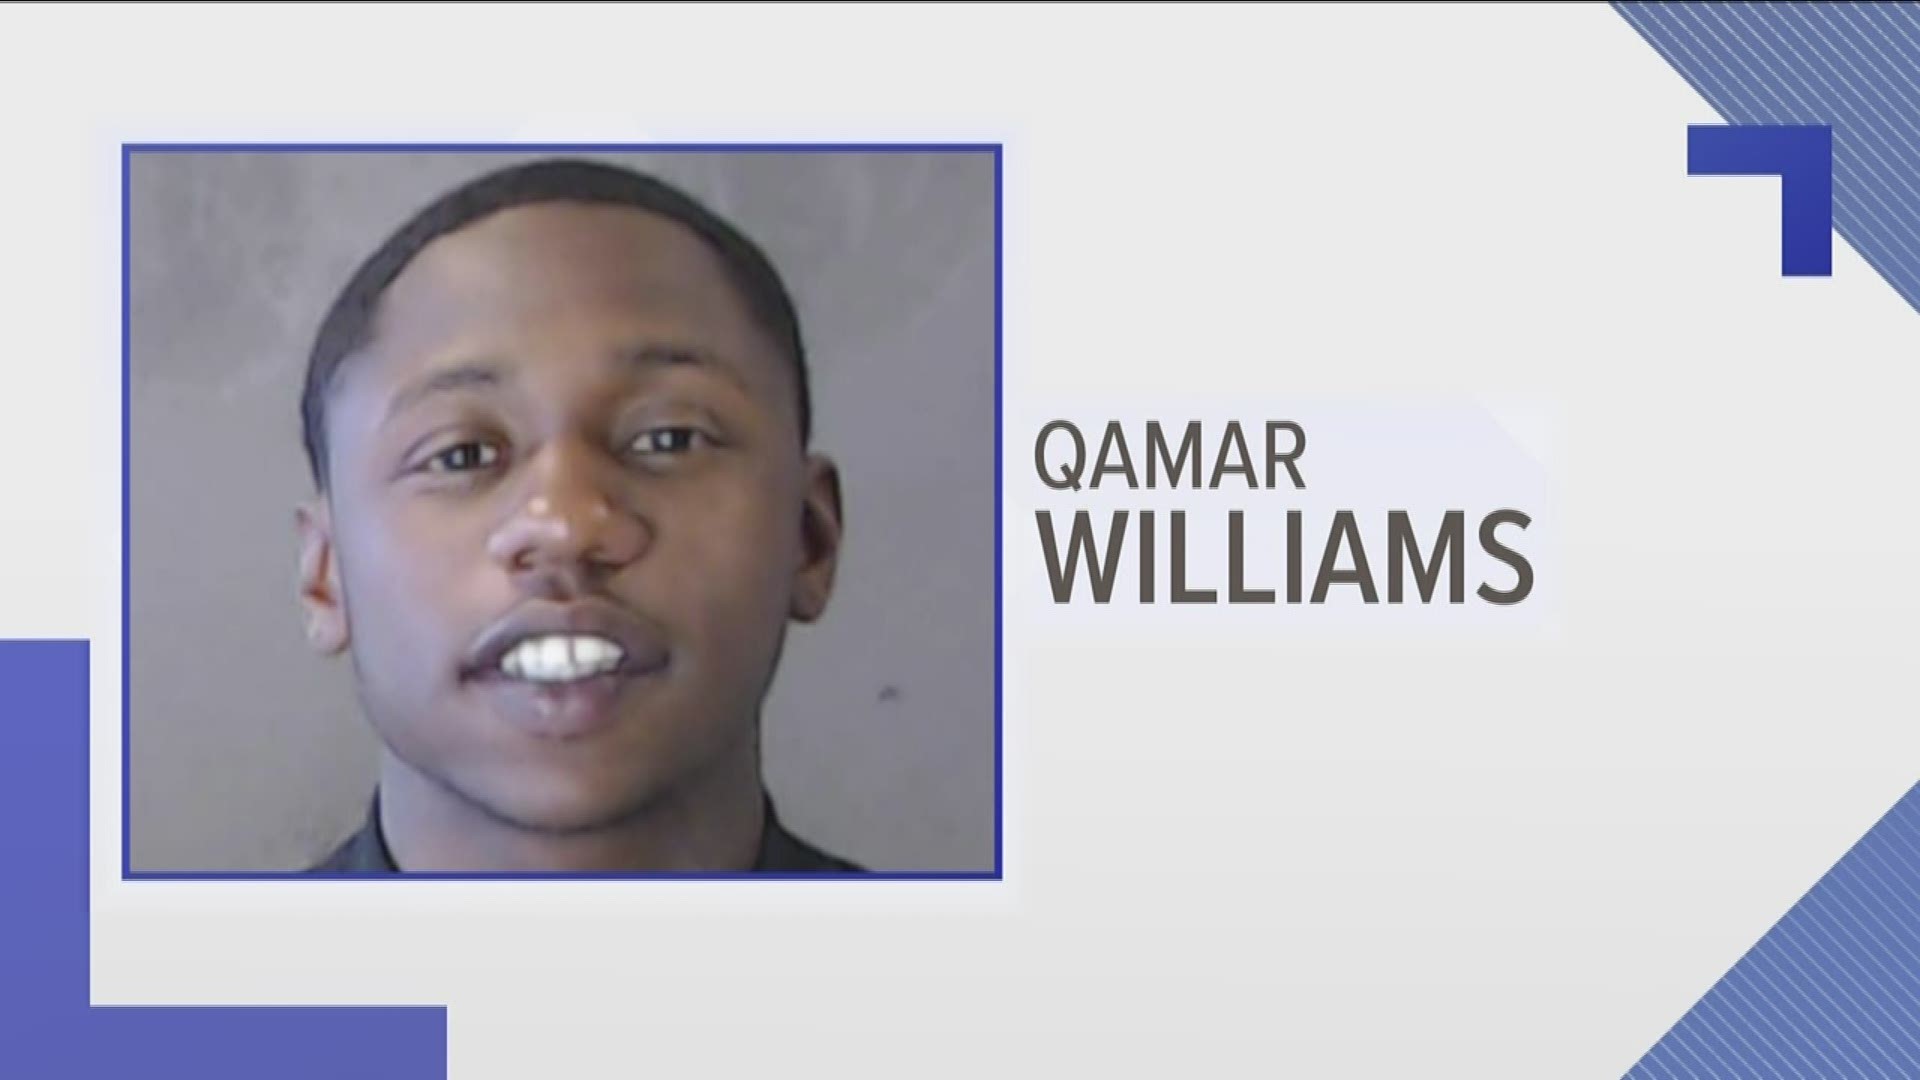 Qamar Akee Williams - also known by his stage name Q Money - is charged in the murder of Calvin Alexander Chappell at a Decatur residence on April 15.